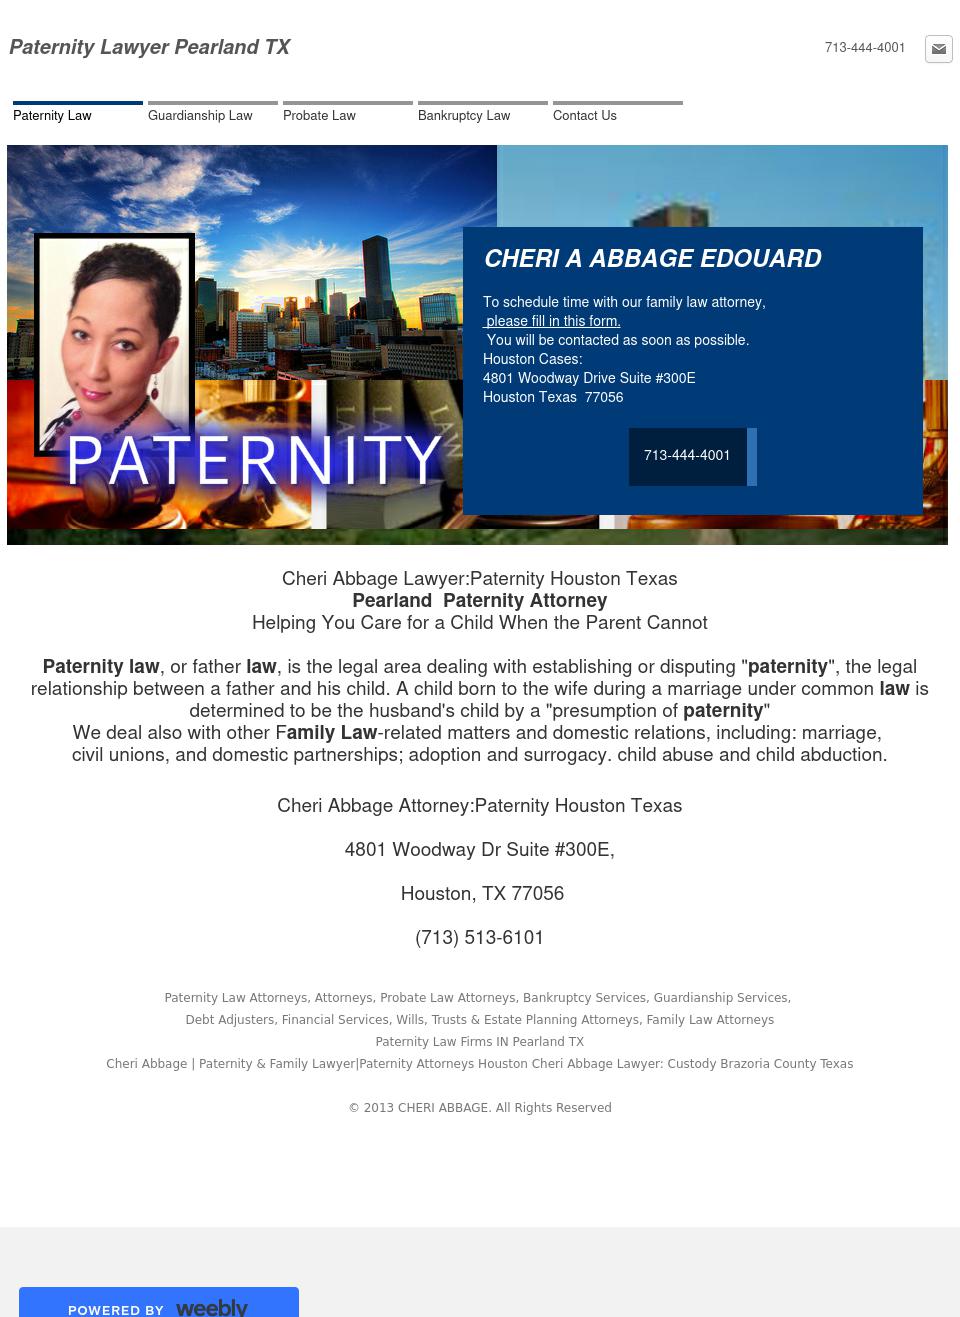 Cheri Abbage Edouard Lawyer: Paternity Pearland Texas - Pearland TX Lawyers